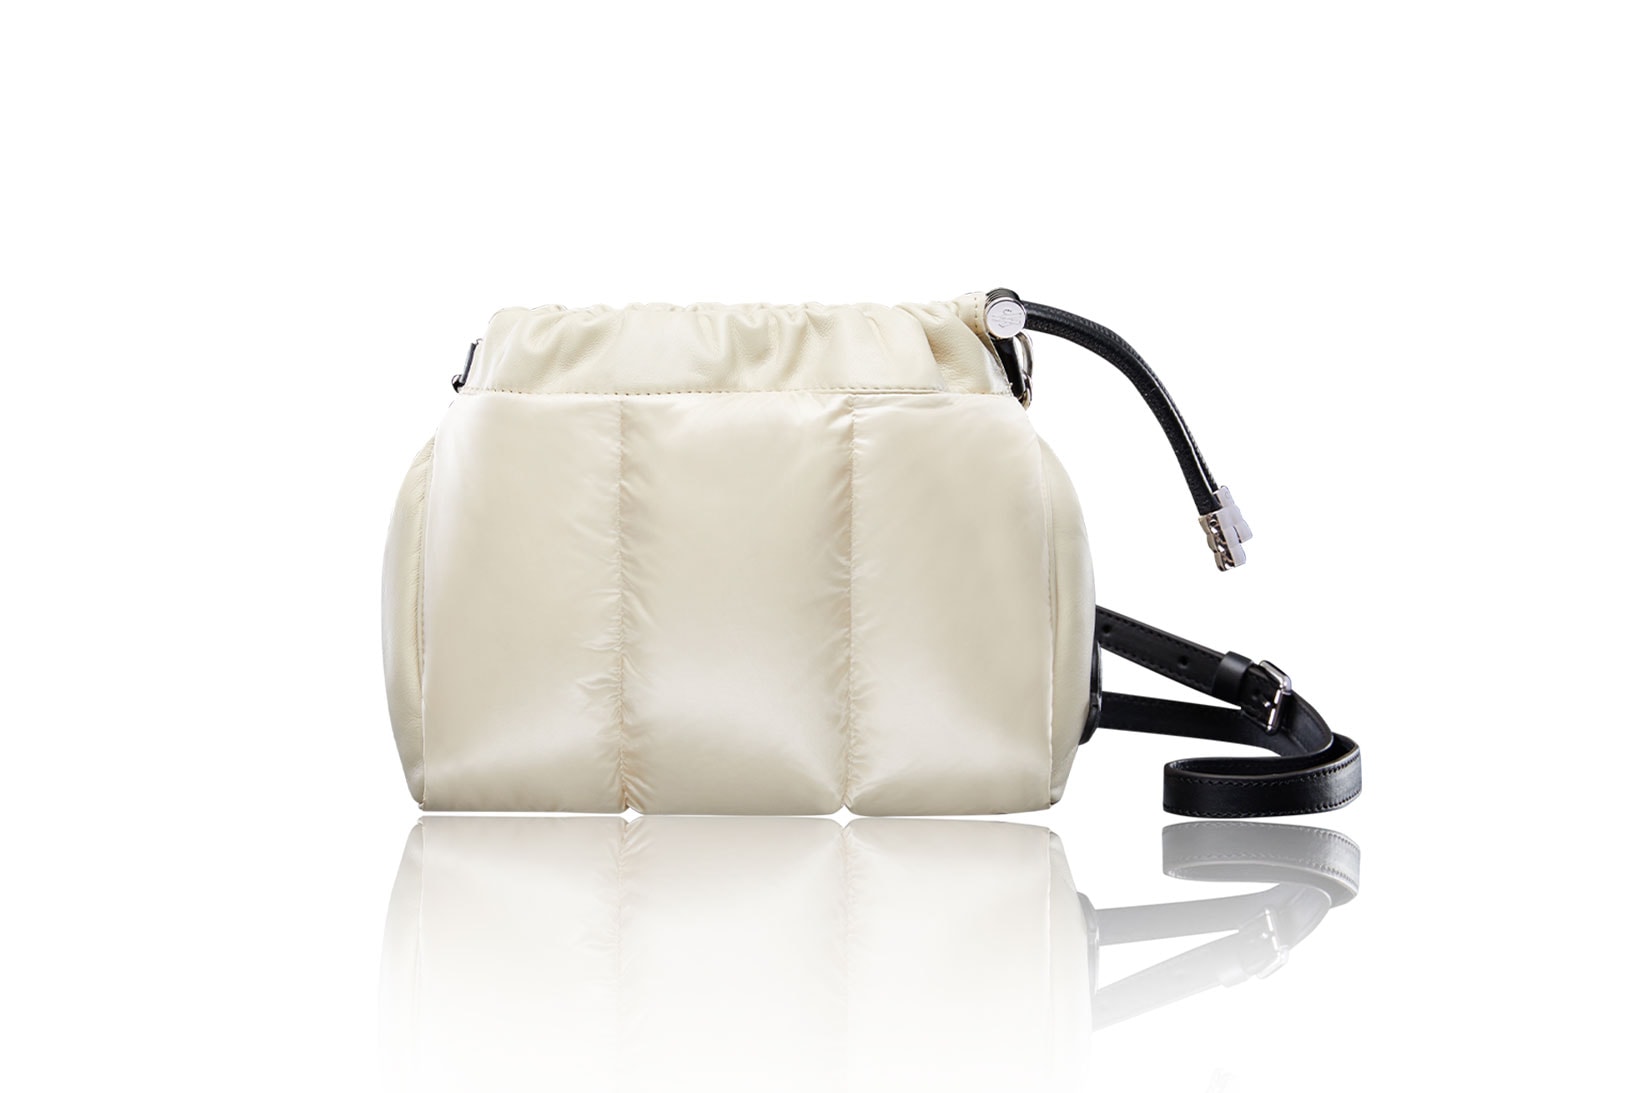 moncler womenswer the freshener ss21 spring summer 2021 collection mini seashell bag